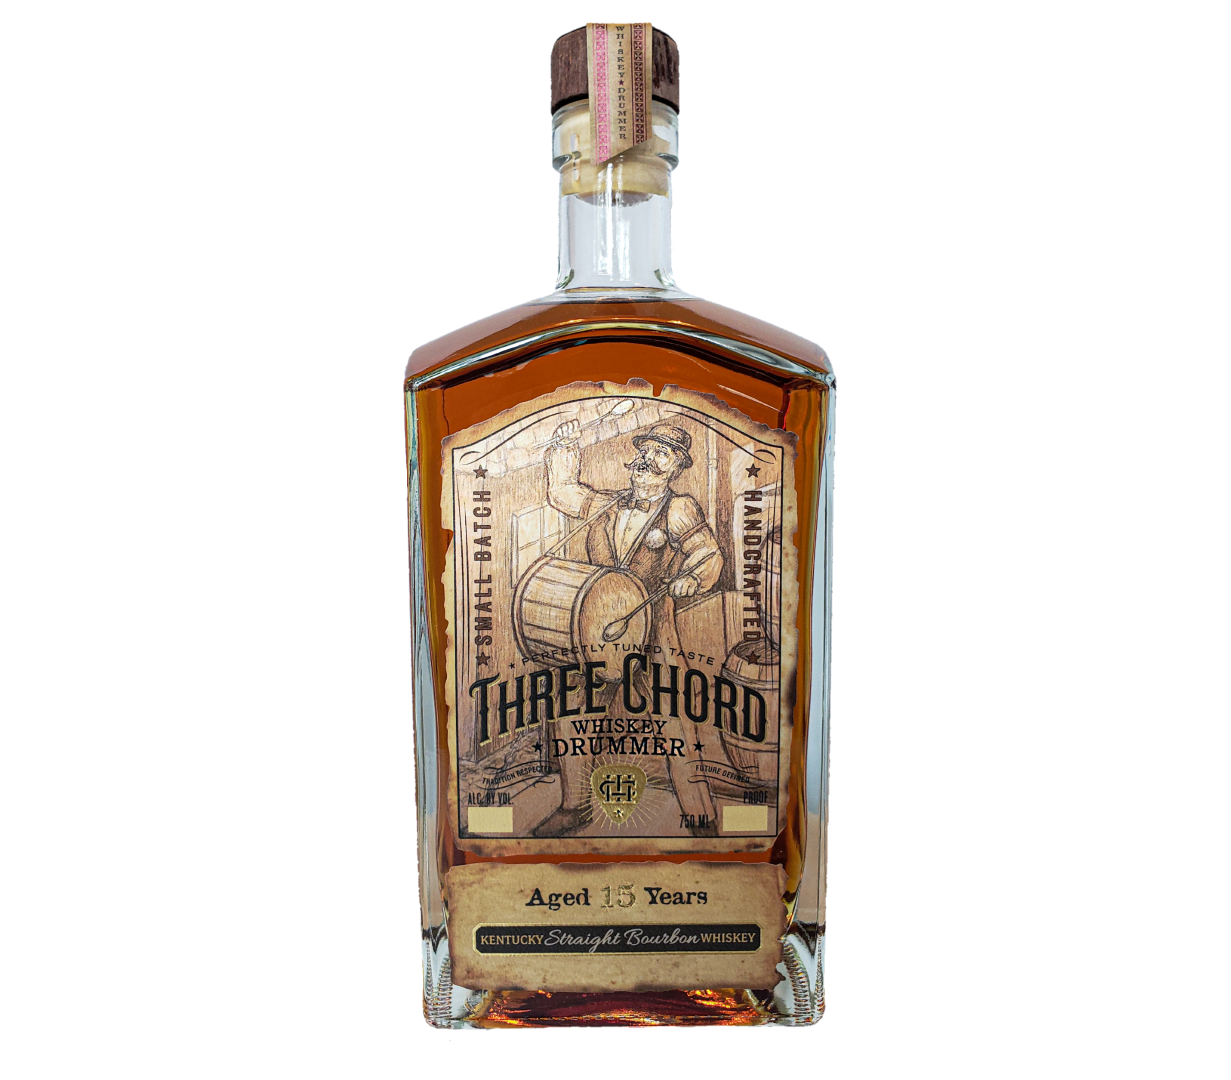 Three Chord Whiskey Drummer Bourbon 15 Years Old